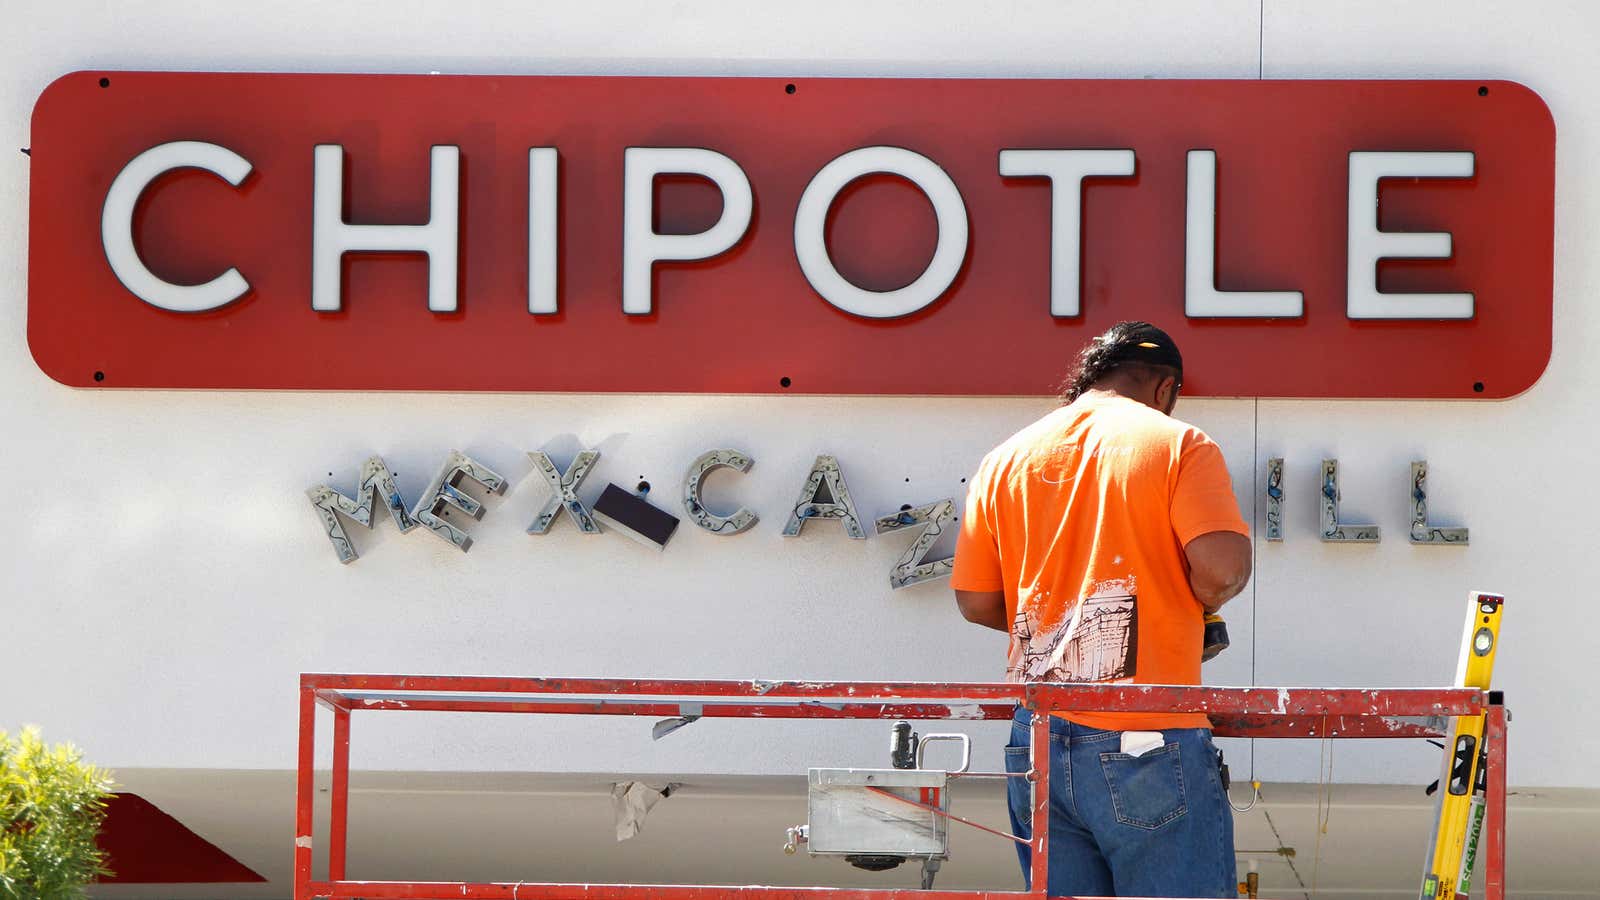 At Chipotle, the price of commodities has been eating into the bottom line.